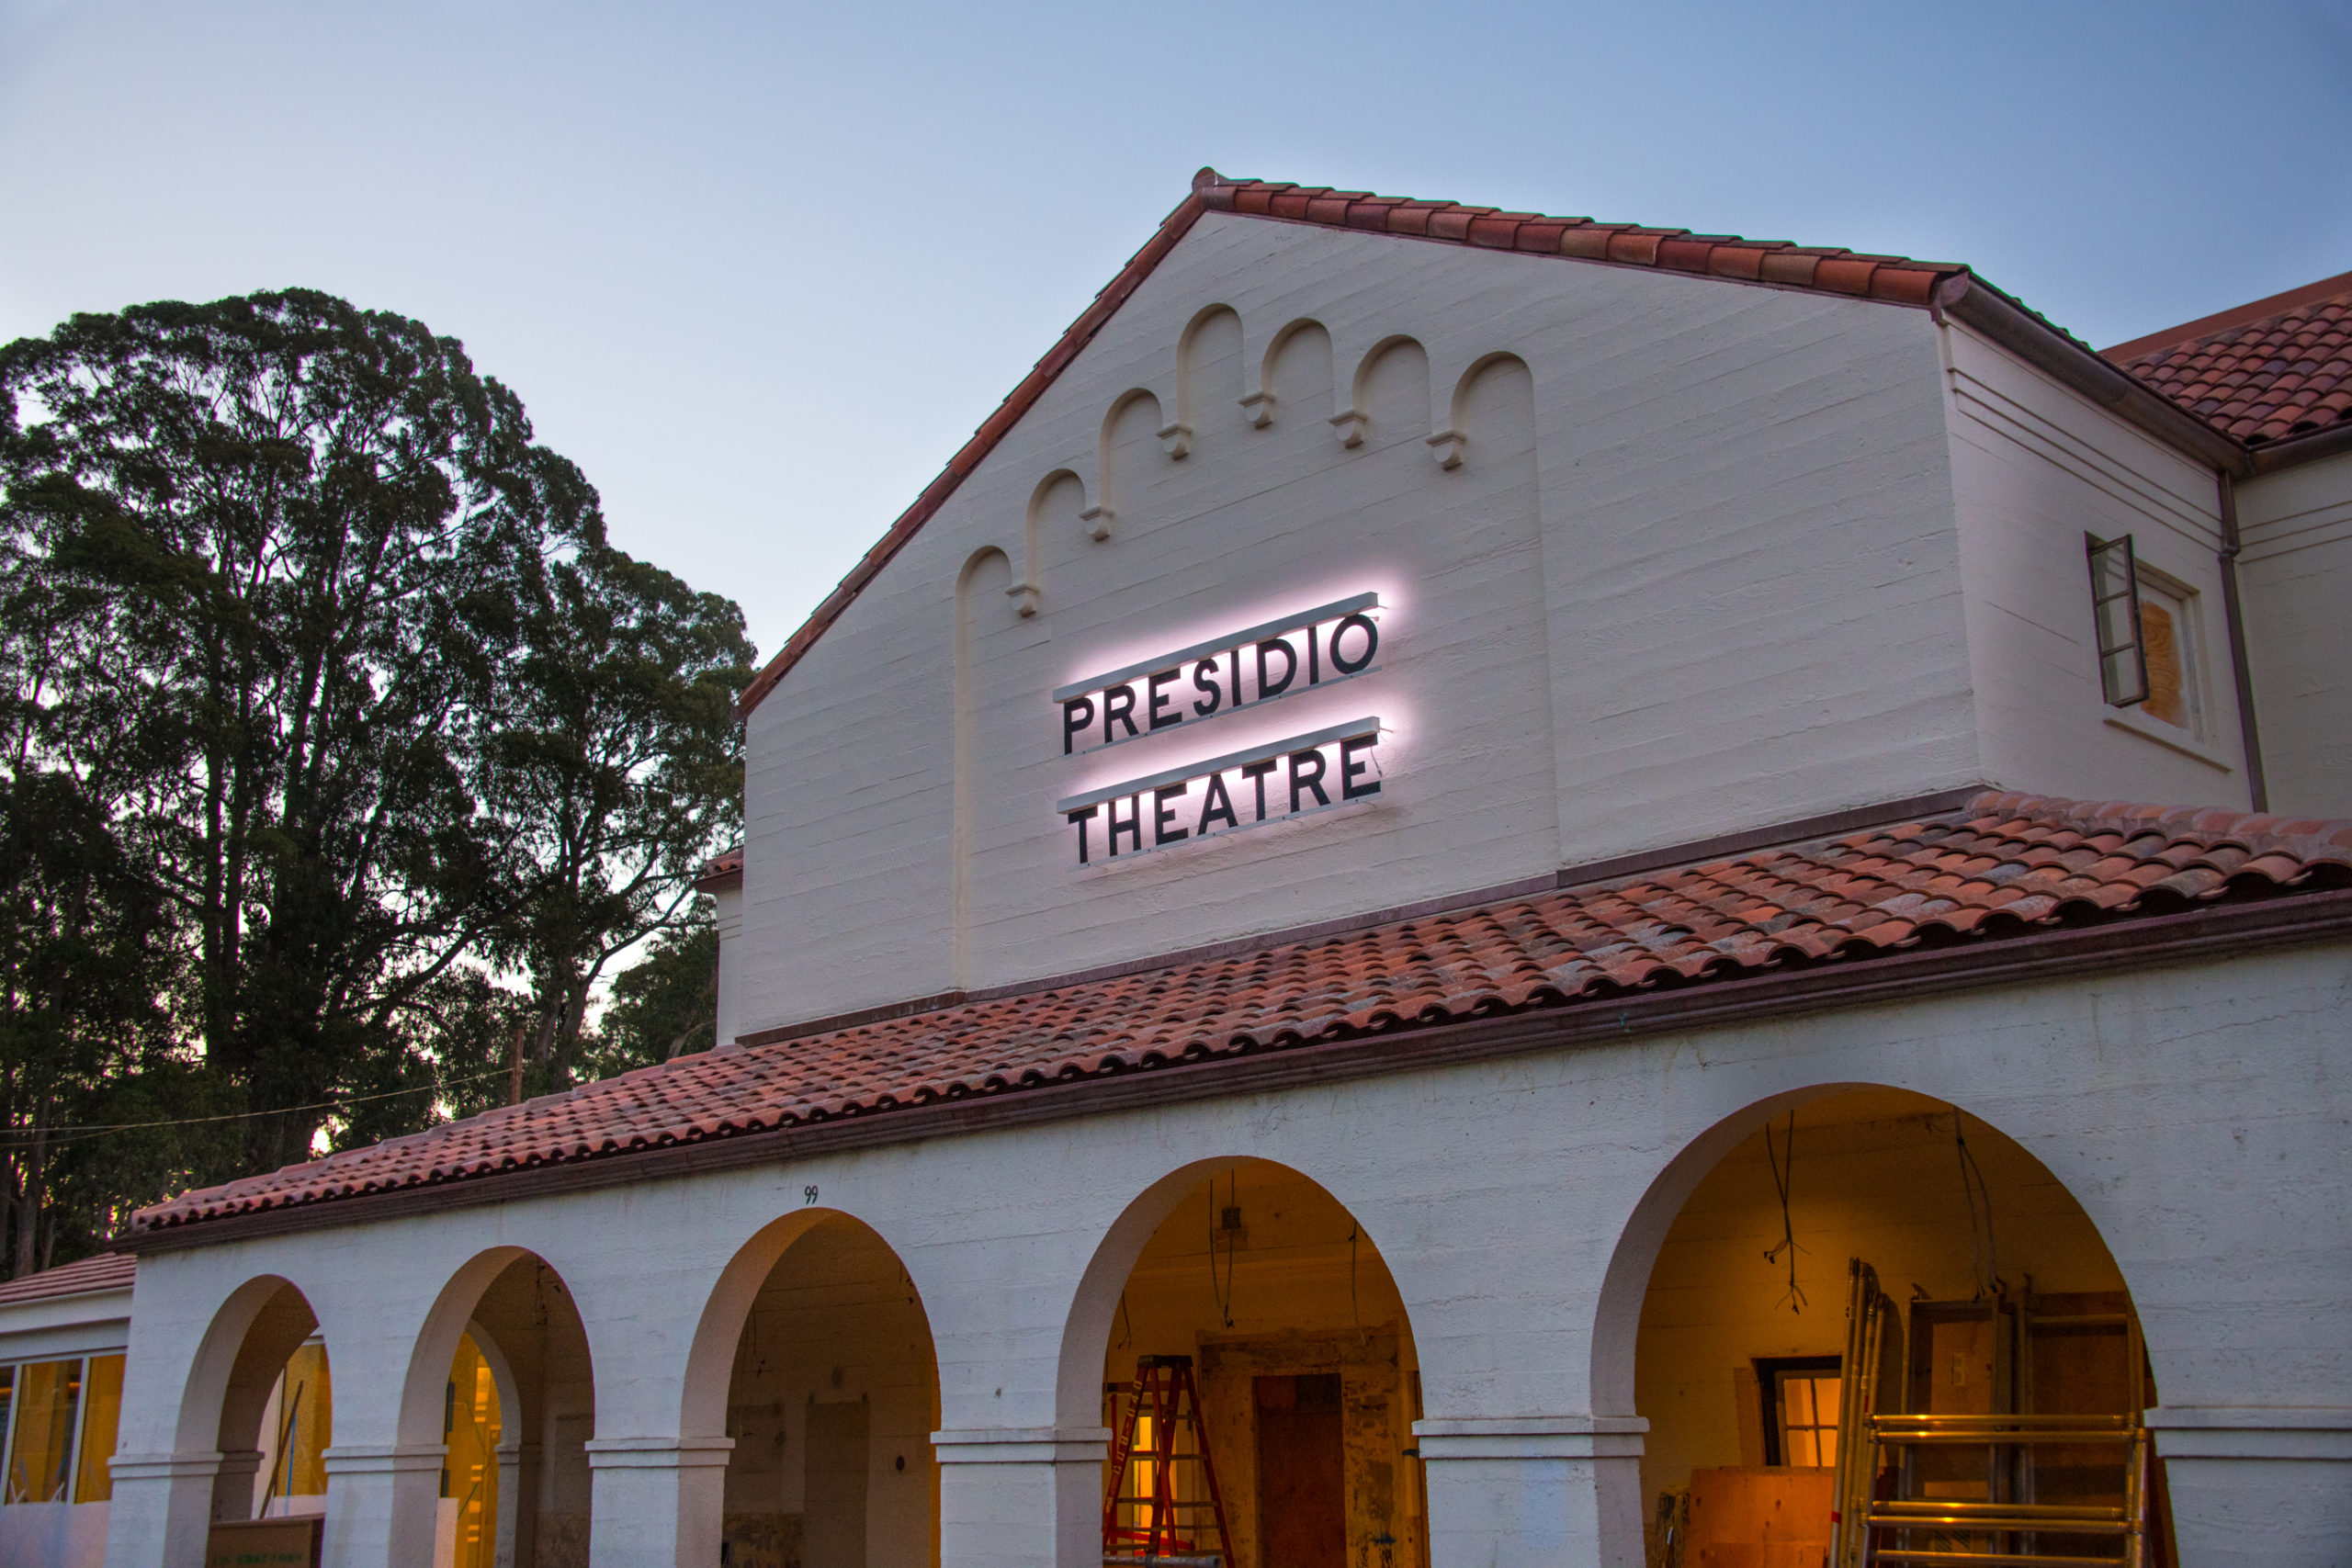 Front of Presidio Theatre from an angle